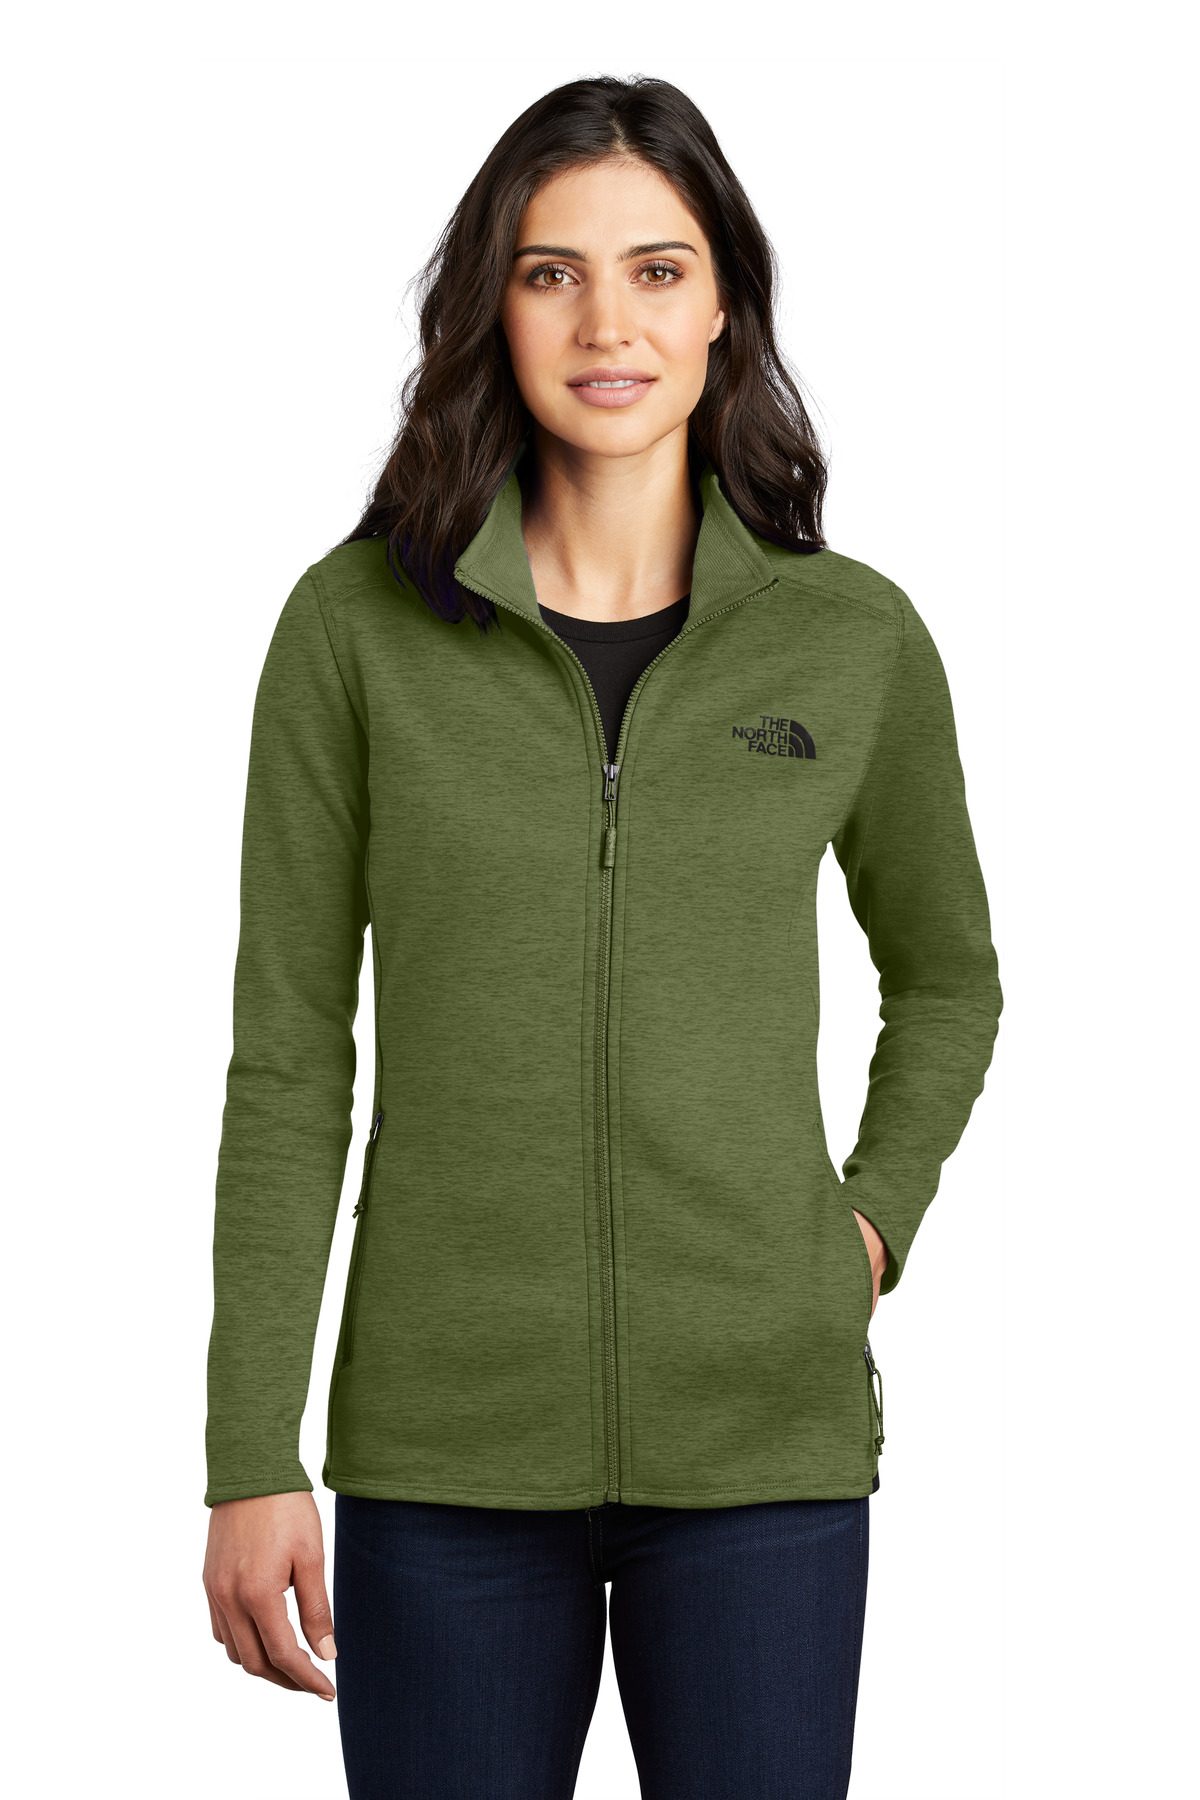 The North Face Ladies Skyline Full-Zip Fleece Jacket-The North Face